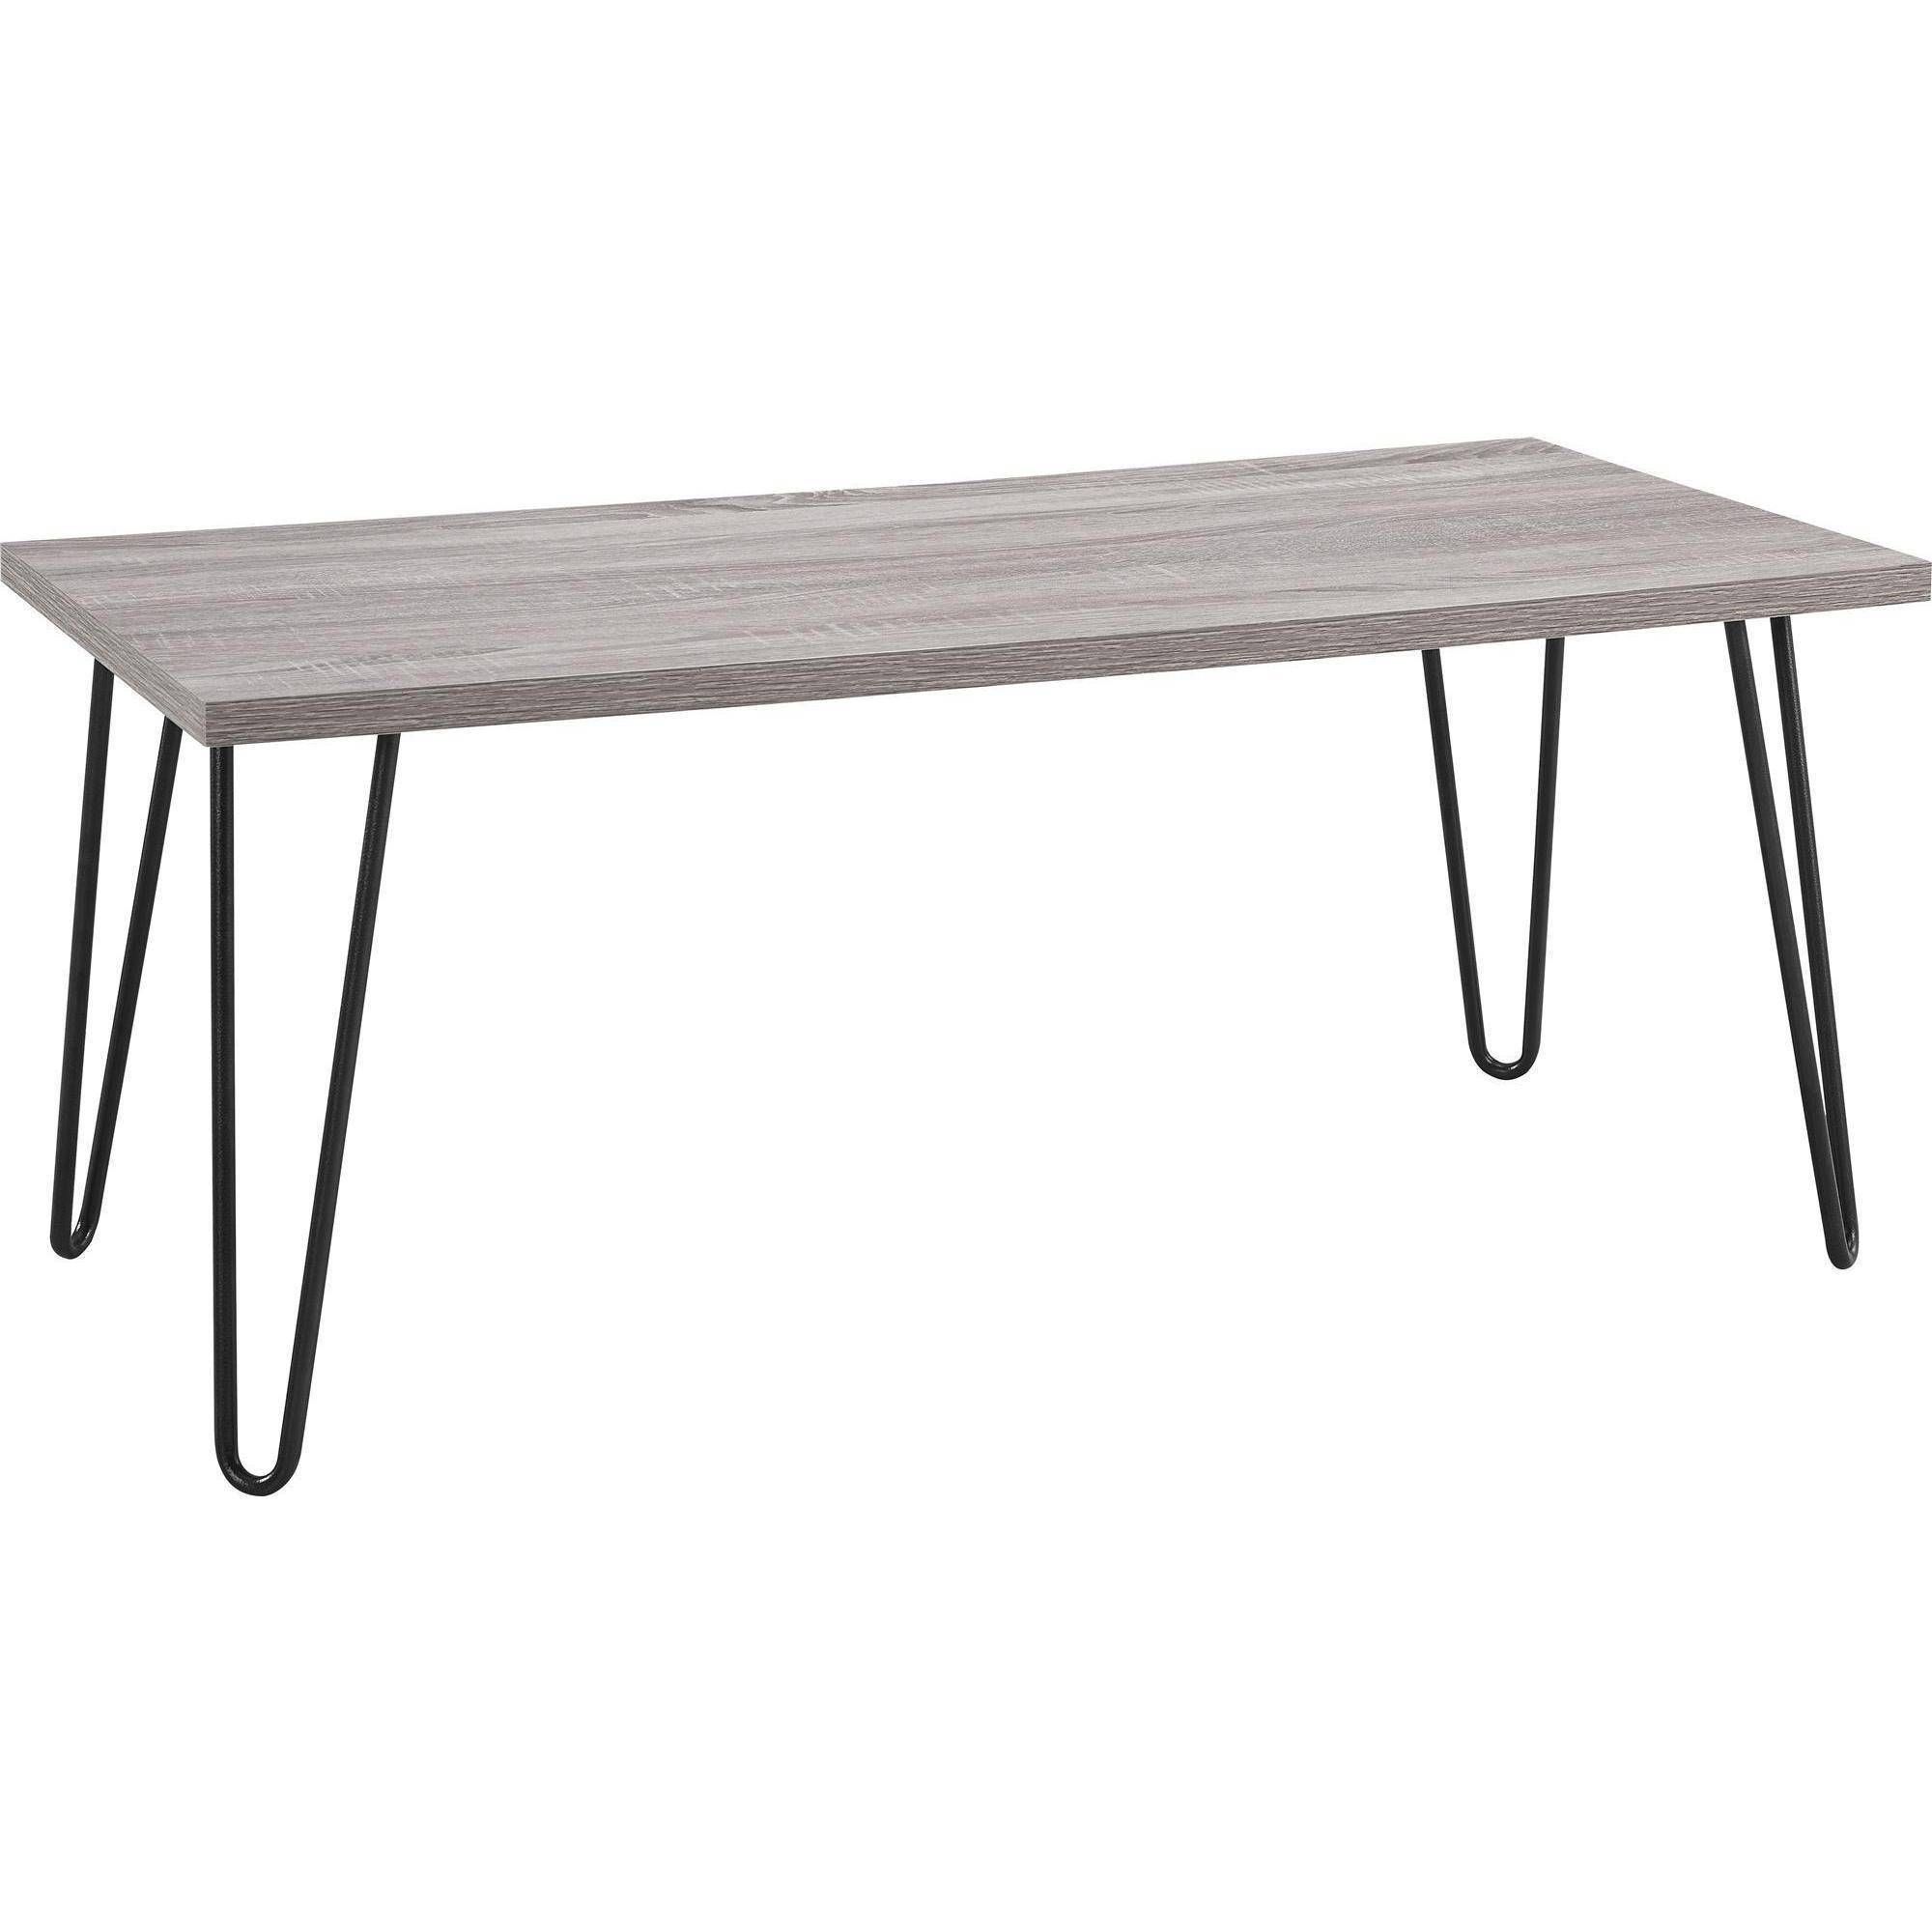 Ameriwood Home Owen Retro Coffee Table, Distressed Gray Oak Throughout White Retro Coffee Tables (View 6 of 30)